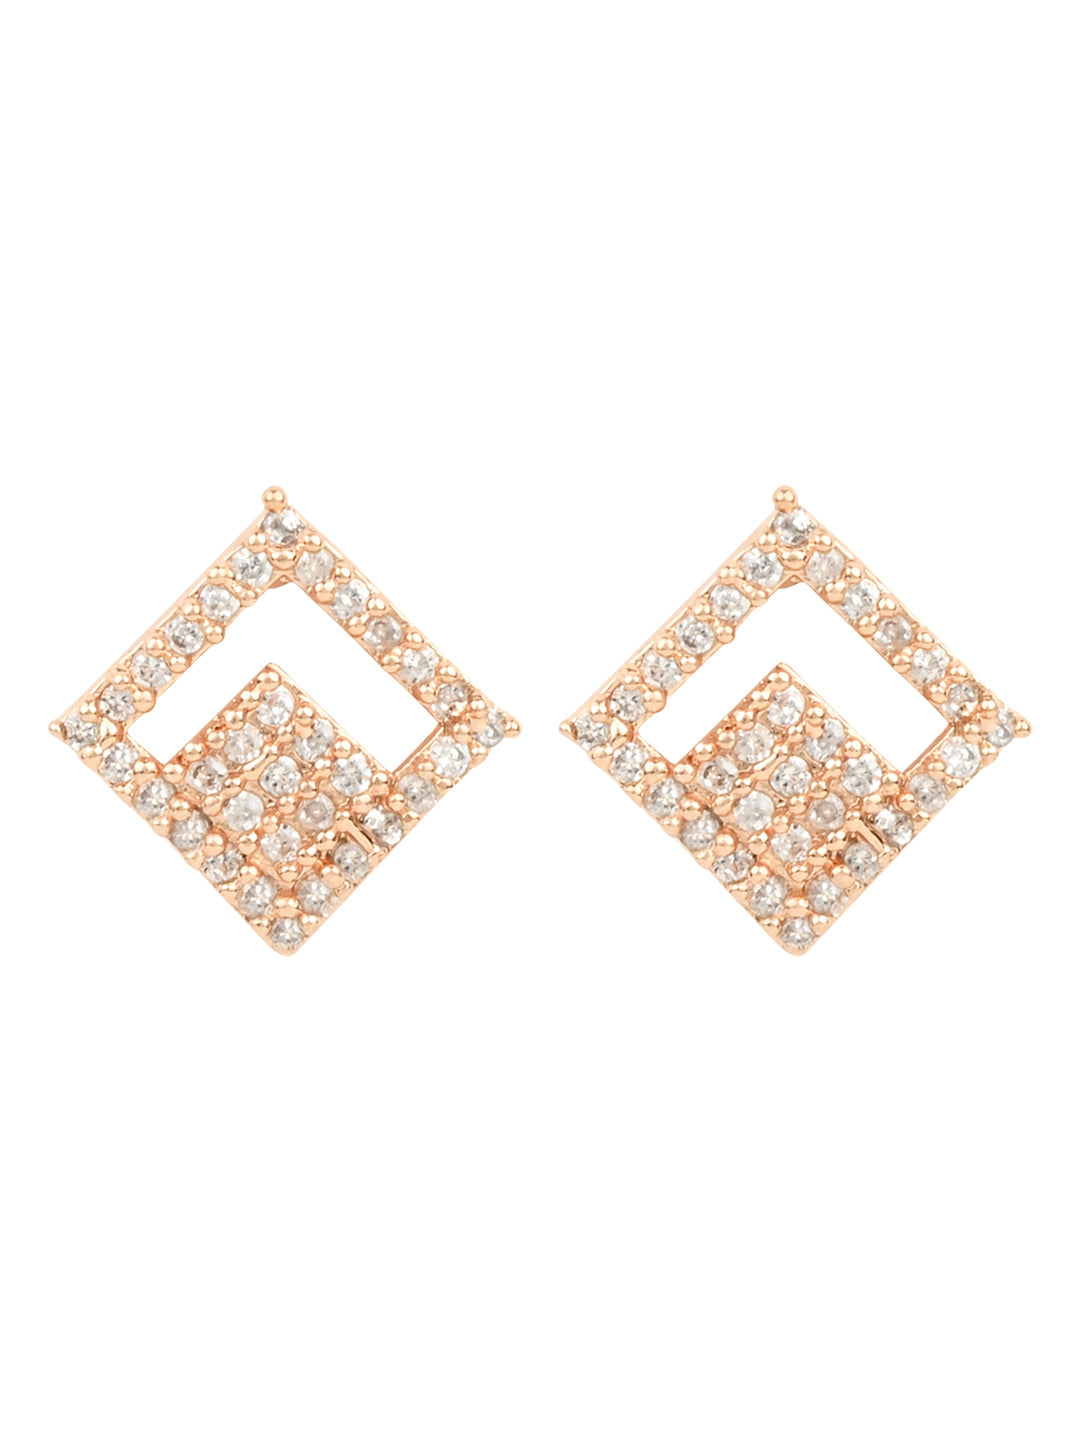 Women's I Jewels Valentine'S Special Rose Gold Plated Square Studs Earrings (E2975) - I Jewels